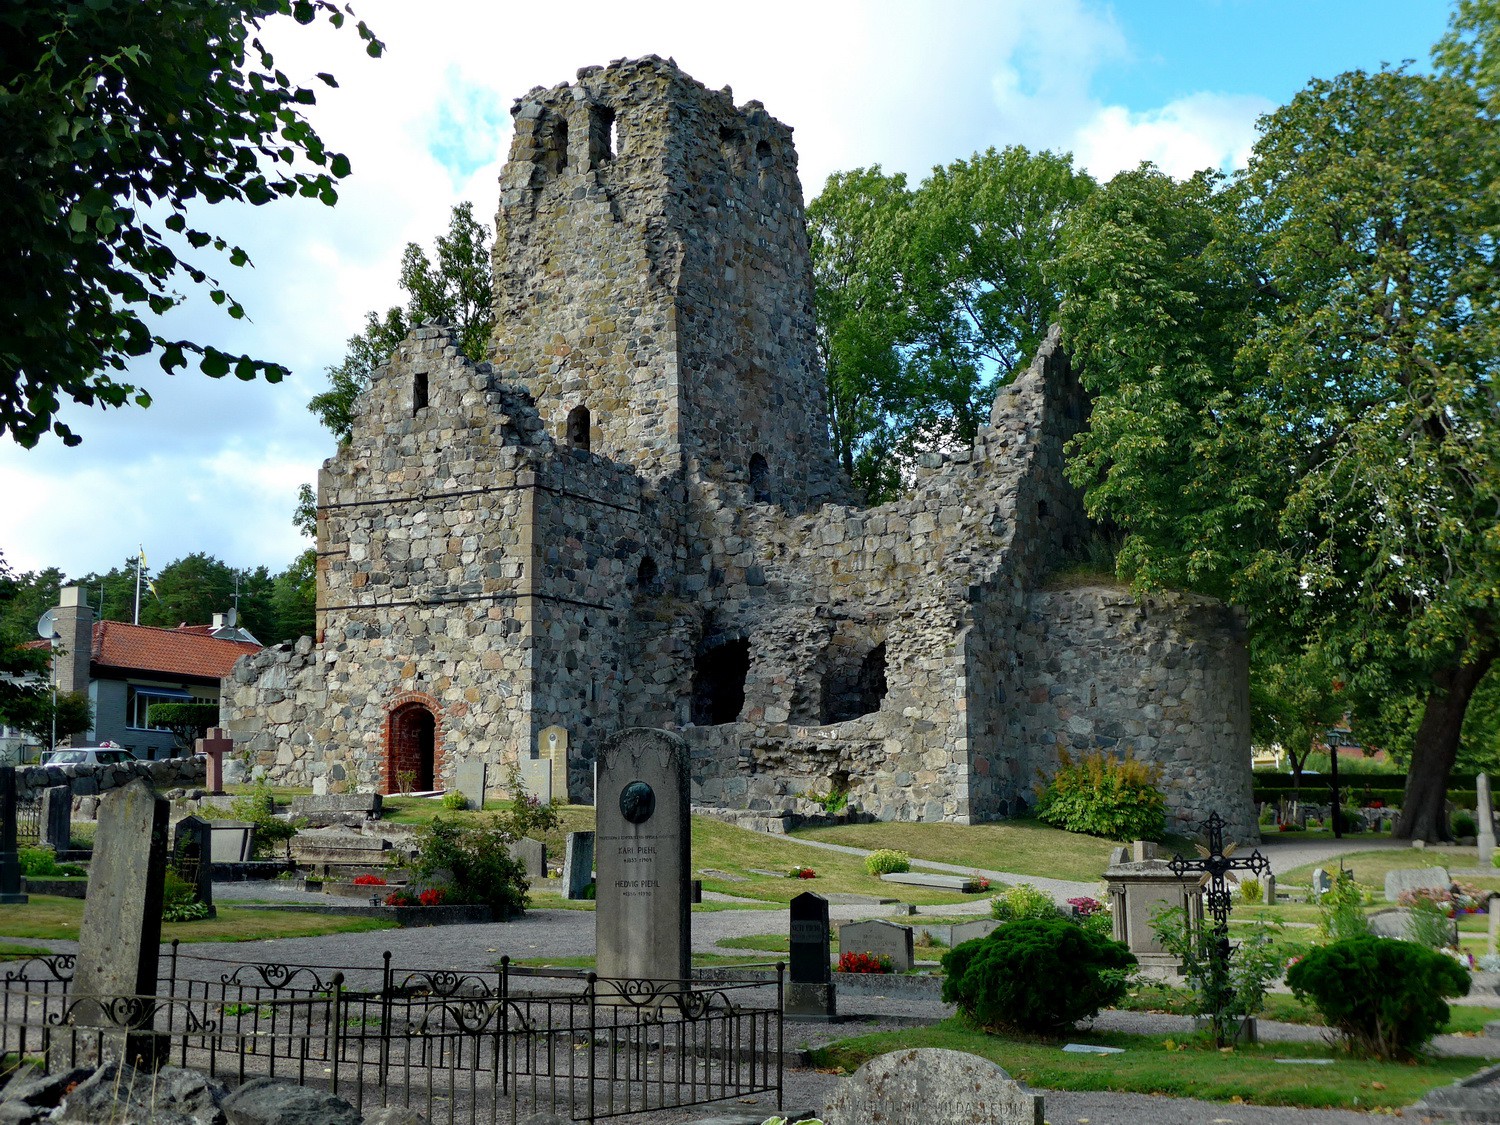 Ruins of the St. Olofs church in Sigtuna, built in the 12th century